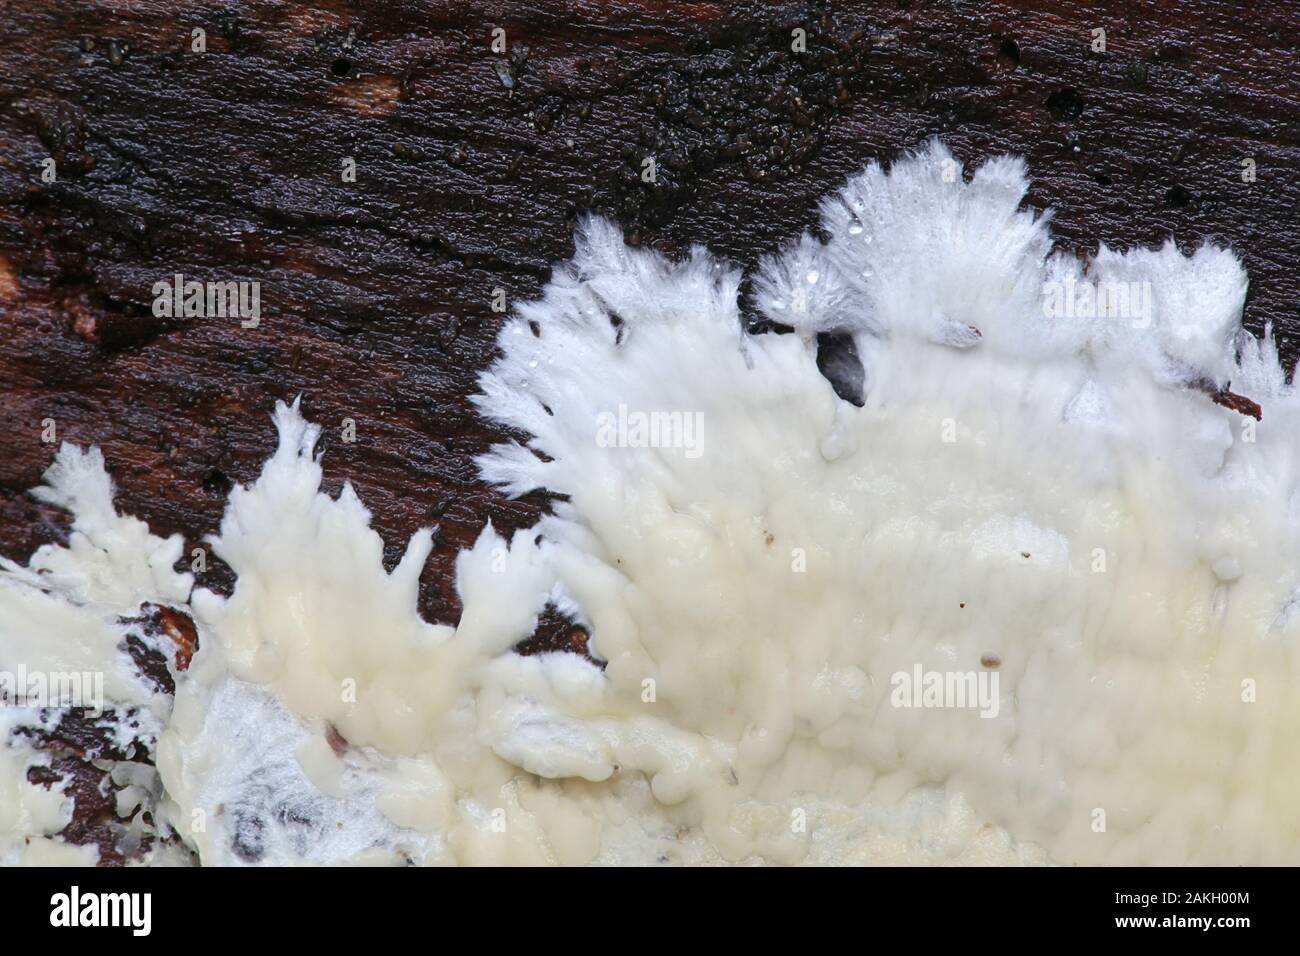 Phlebia centrifuga, a crust fungus in the family Meruliaceae, growing on spruce log in Finland Stock Photo